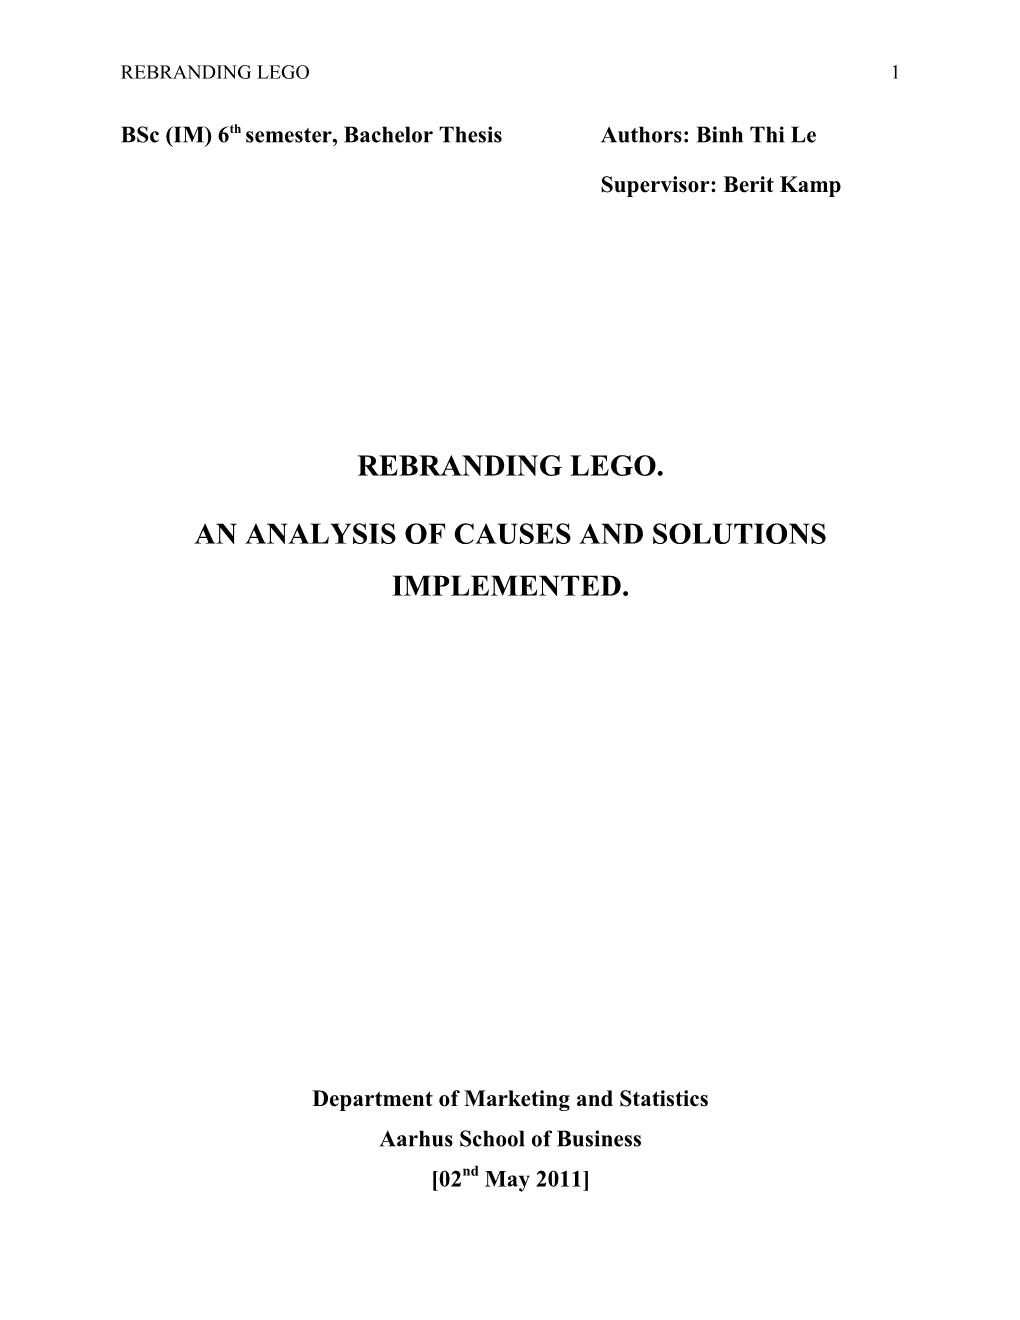 Rebranding Lego. an Analysis of Causes and Solutions